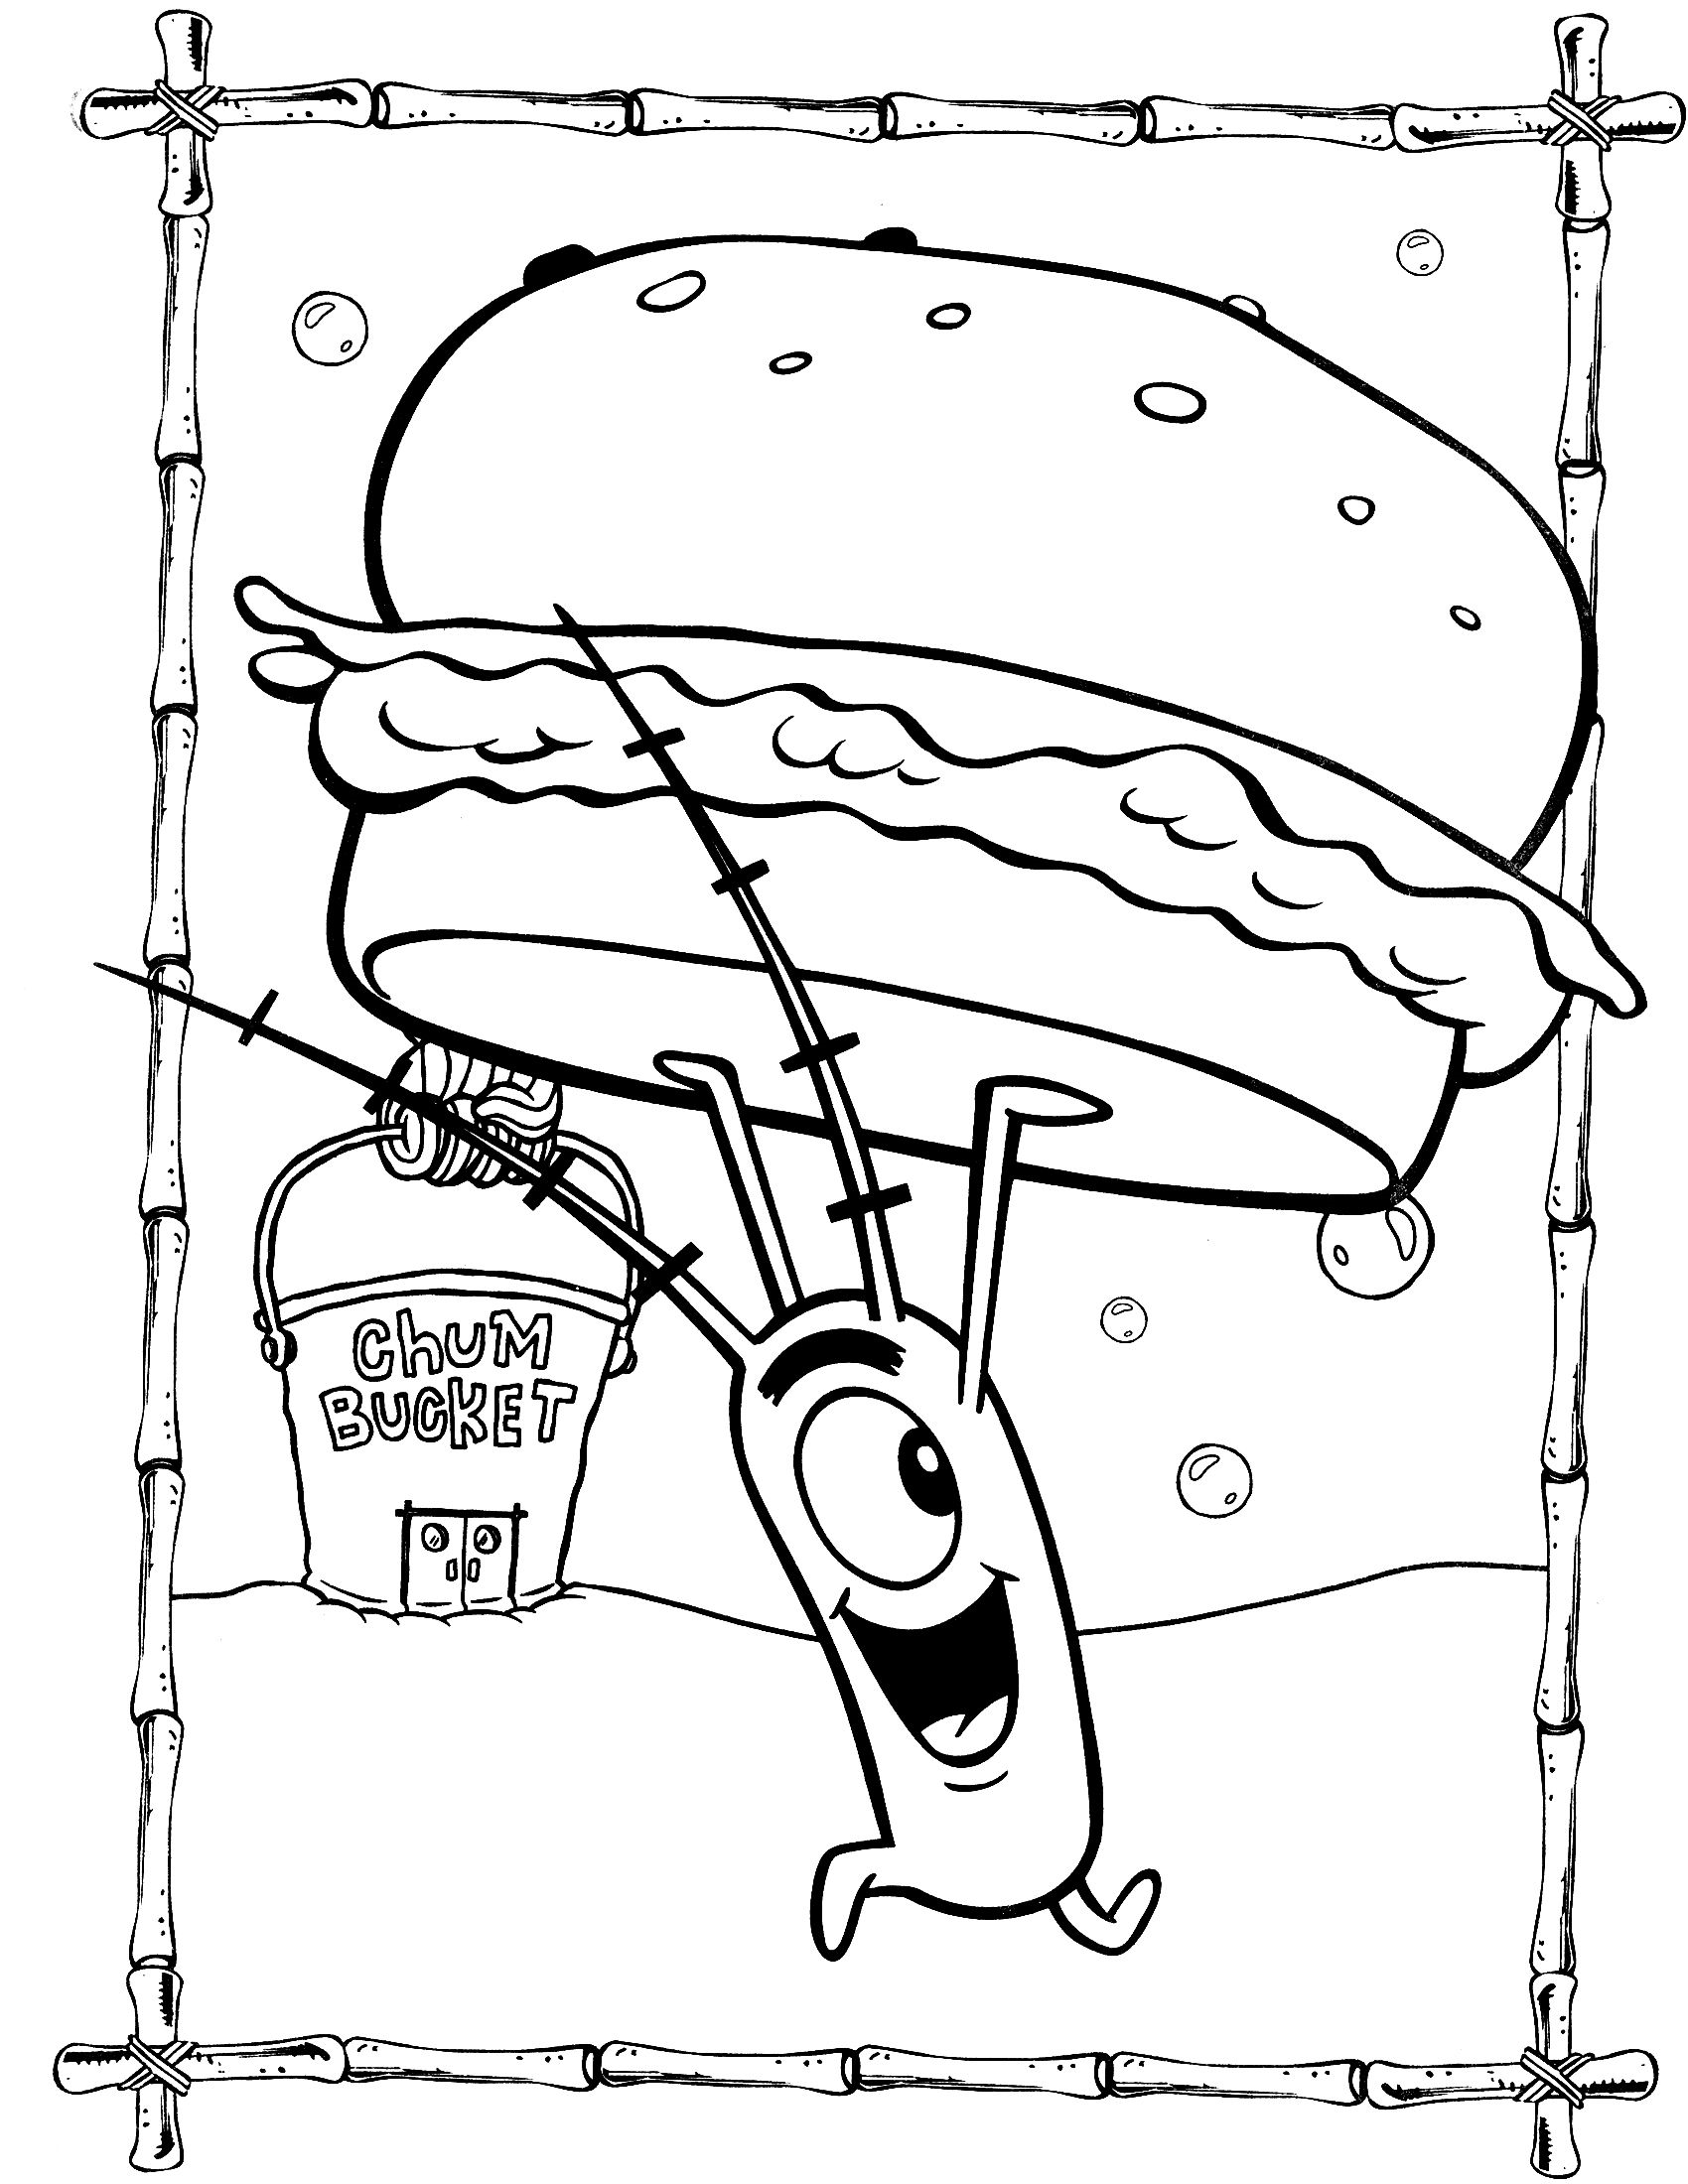 Funny Spongebob Coloring Pages Printables 24